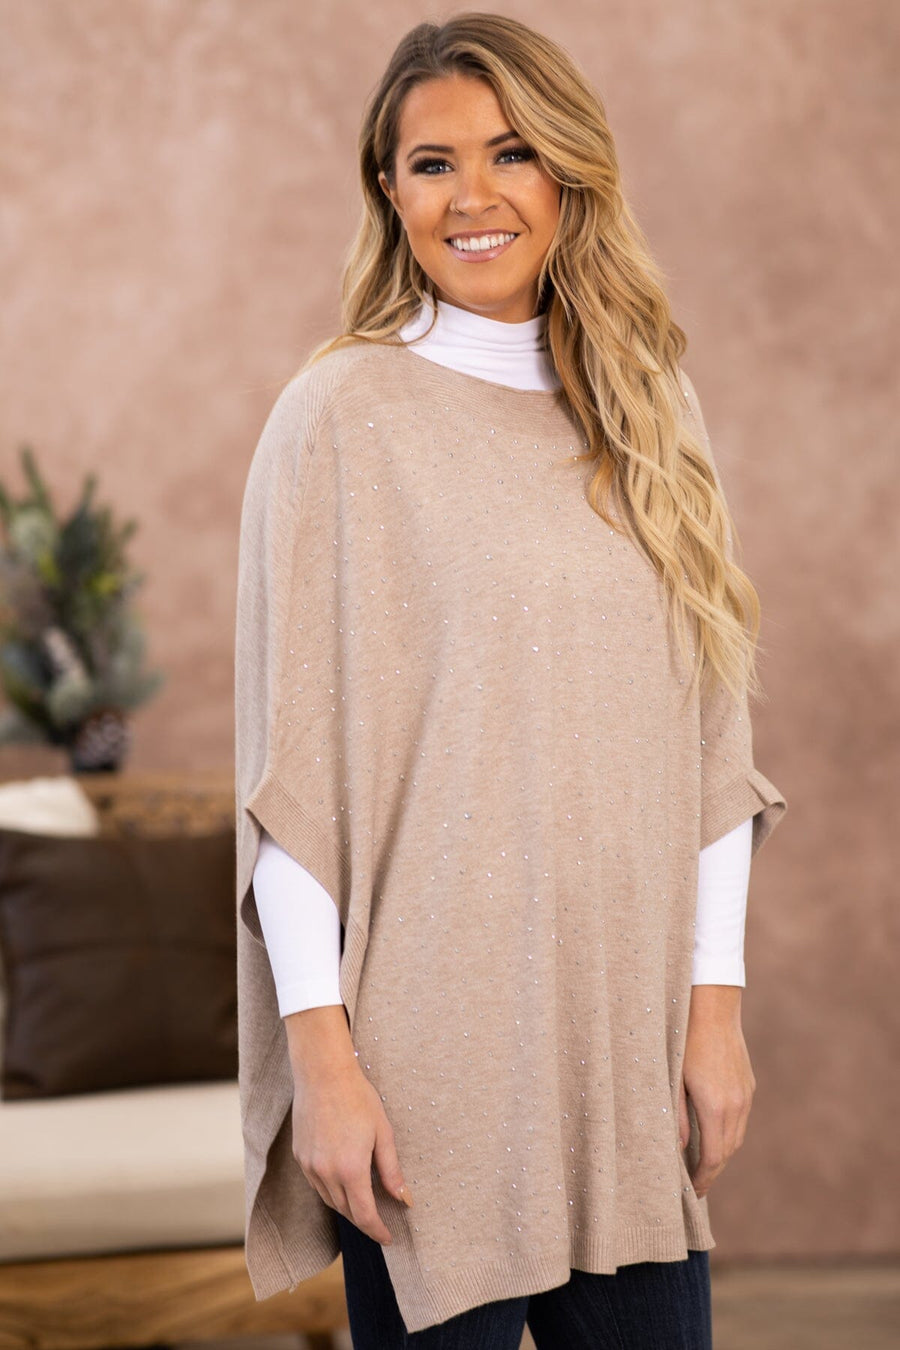 Tan and Gold Scattered Studs Sweater - Filly Flair